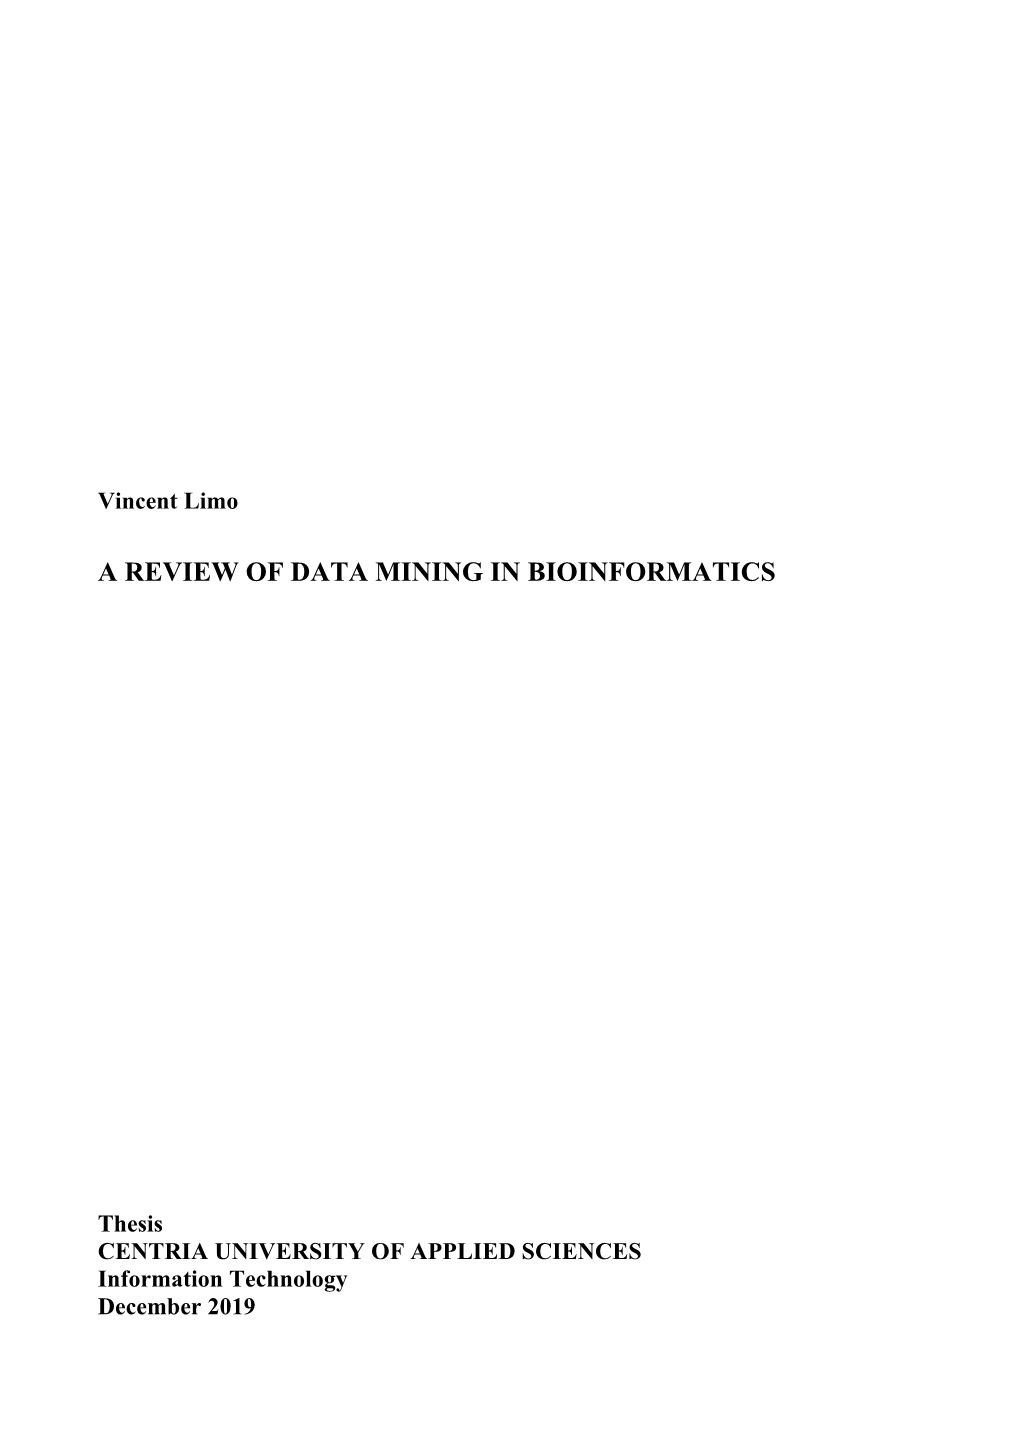 A Review of Data Mining in Bioinformatics